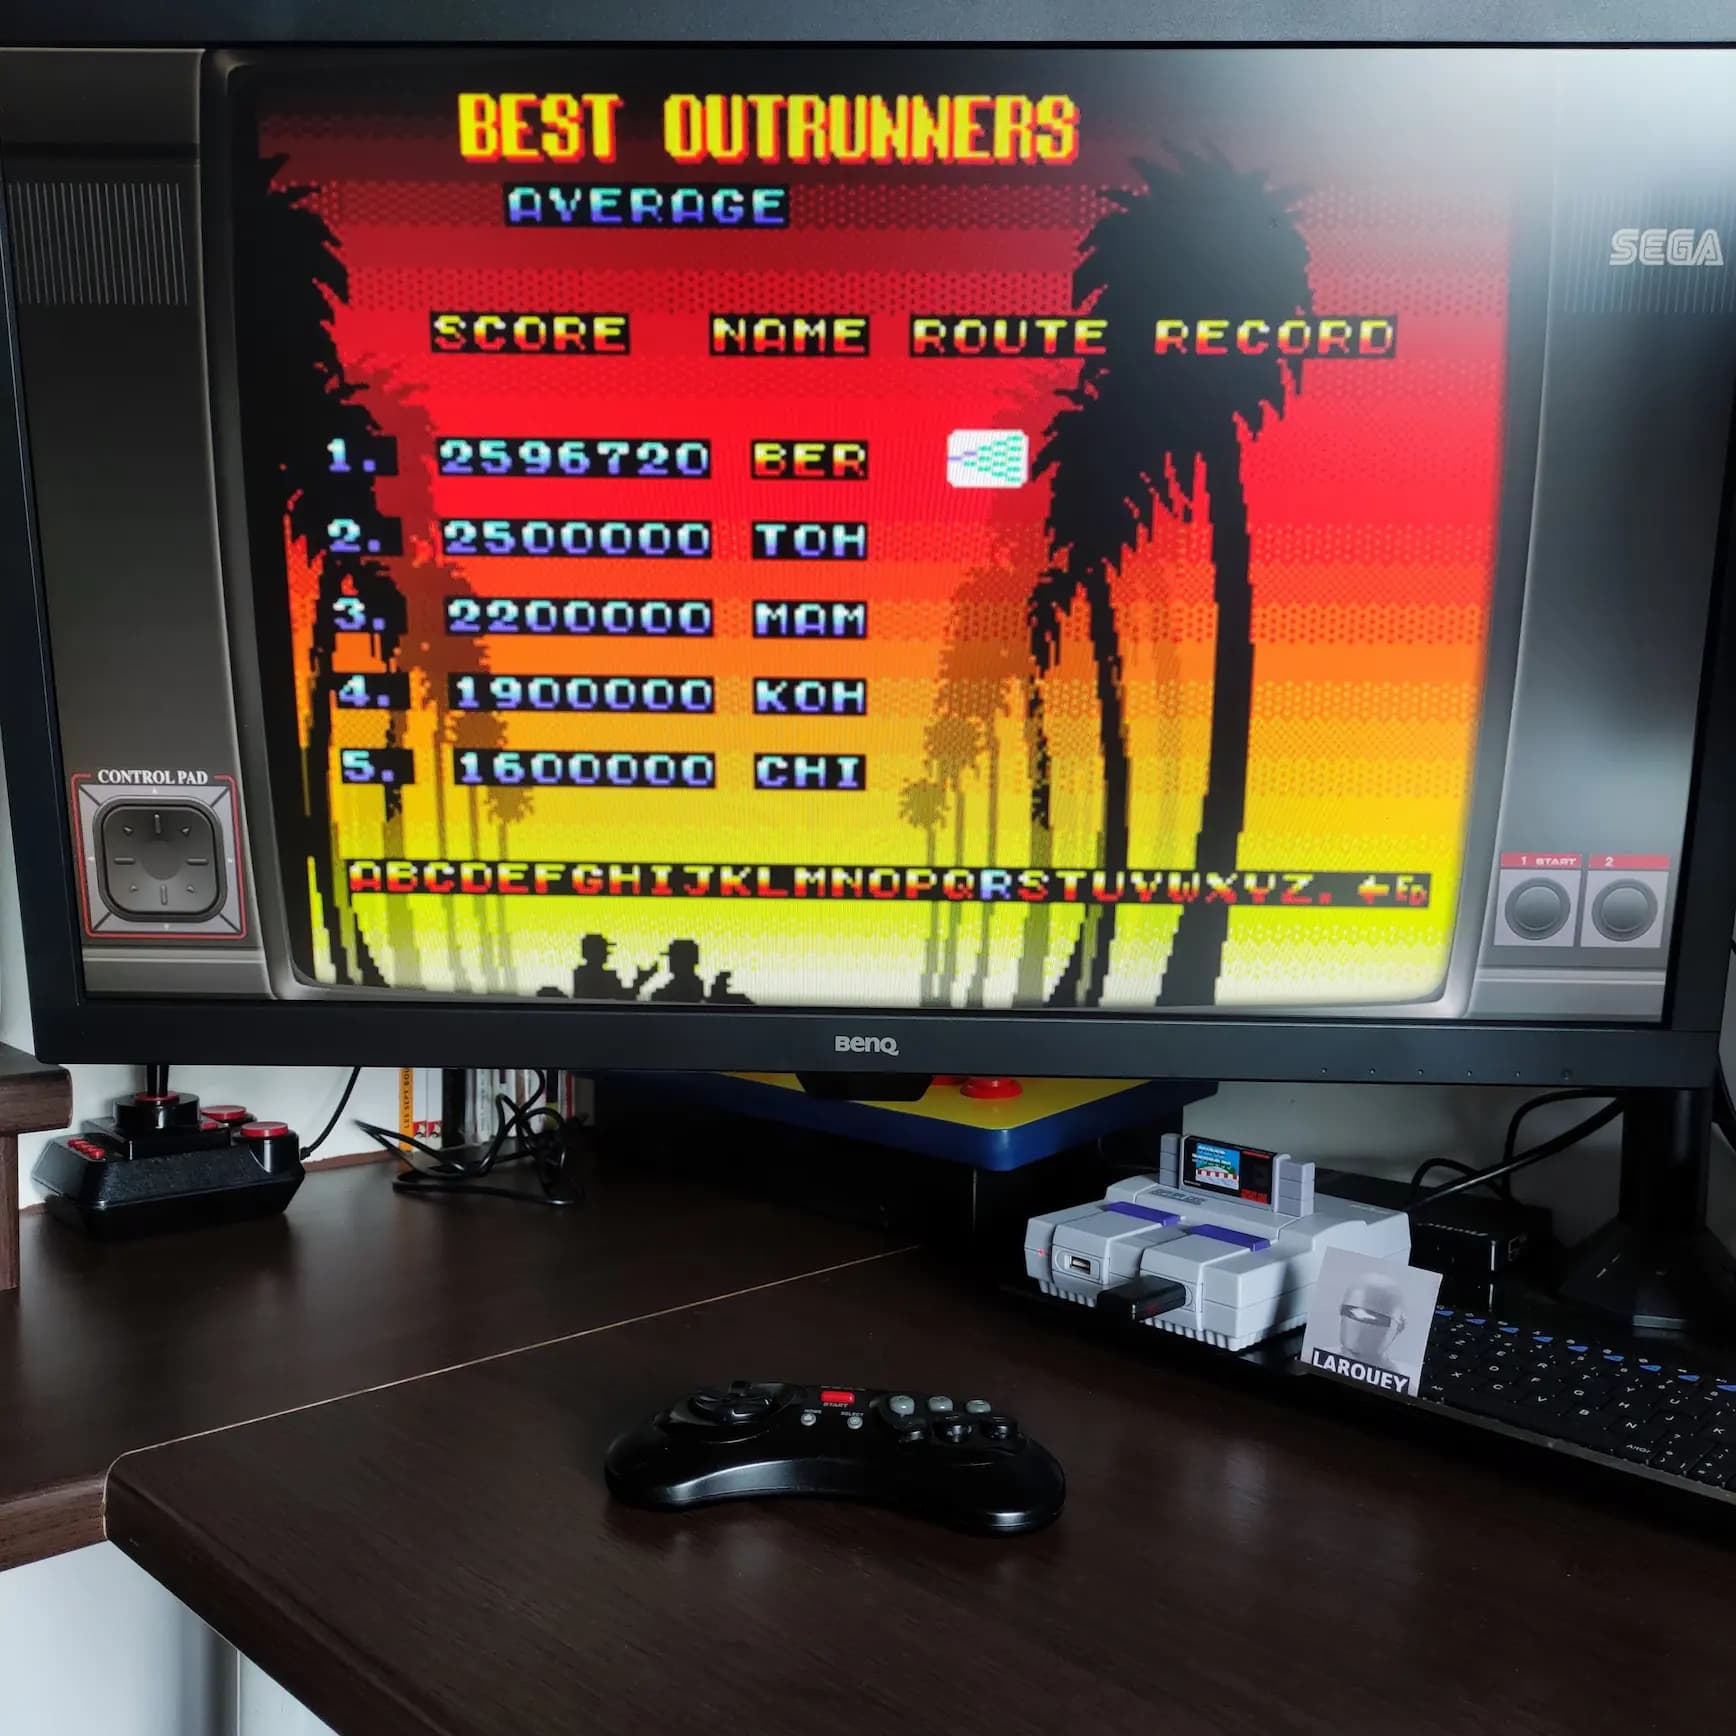 Larquey: OutRun 3D [Average] (Sega Master System Emulated) 2,596,720 points on 2022-07-30 01:26:57